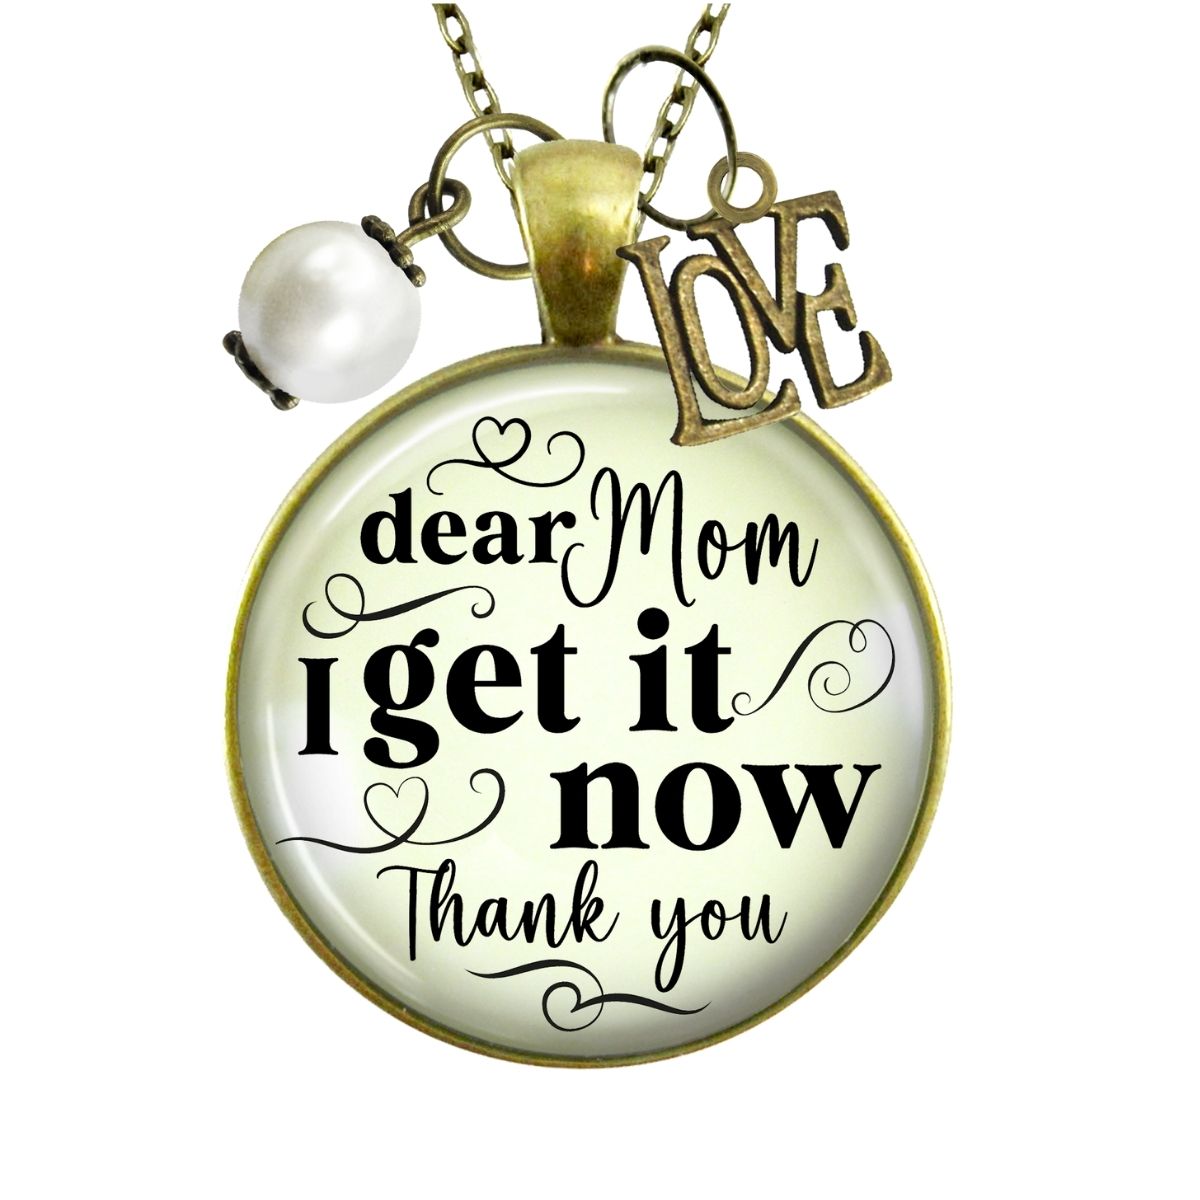 Handmade Gutsy Goodness Jewelry Message Card Dear Mom I Get It Now Necklace Gift From Adult Daughter Love You Theme Boho Jewelry & Message Card